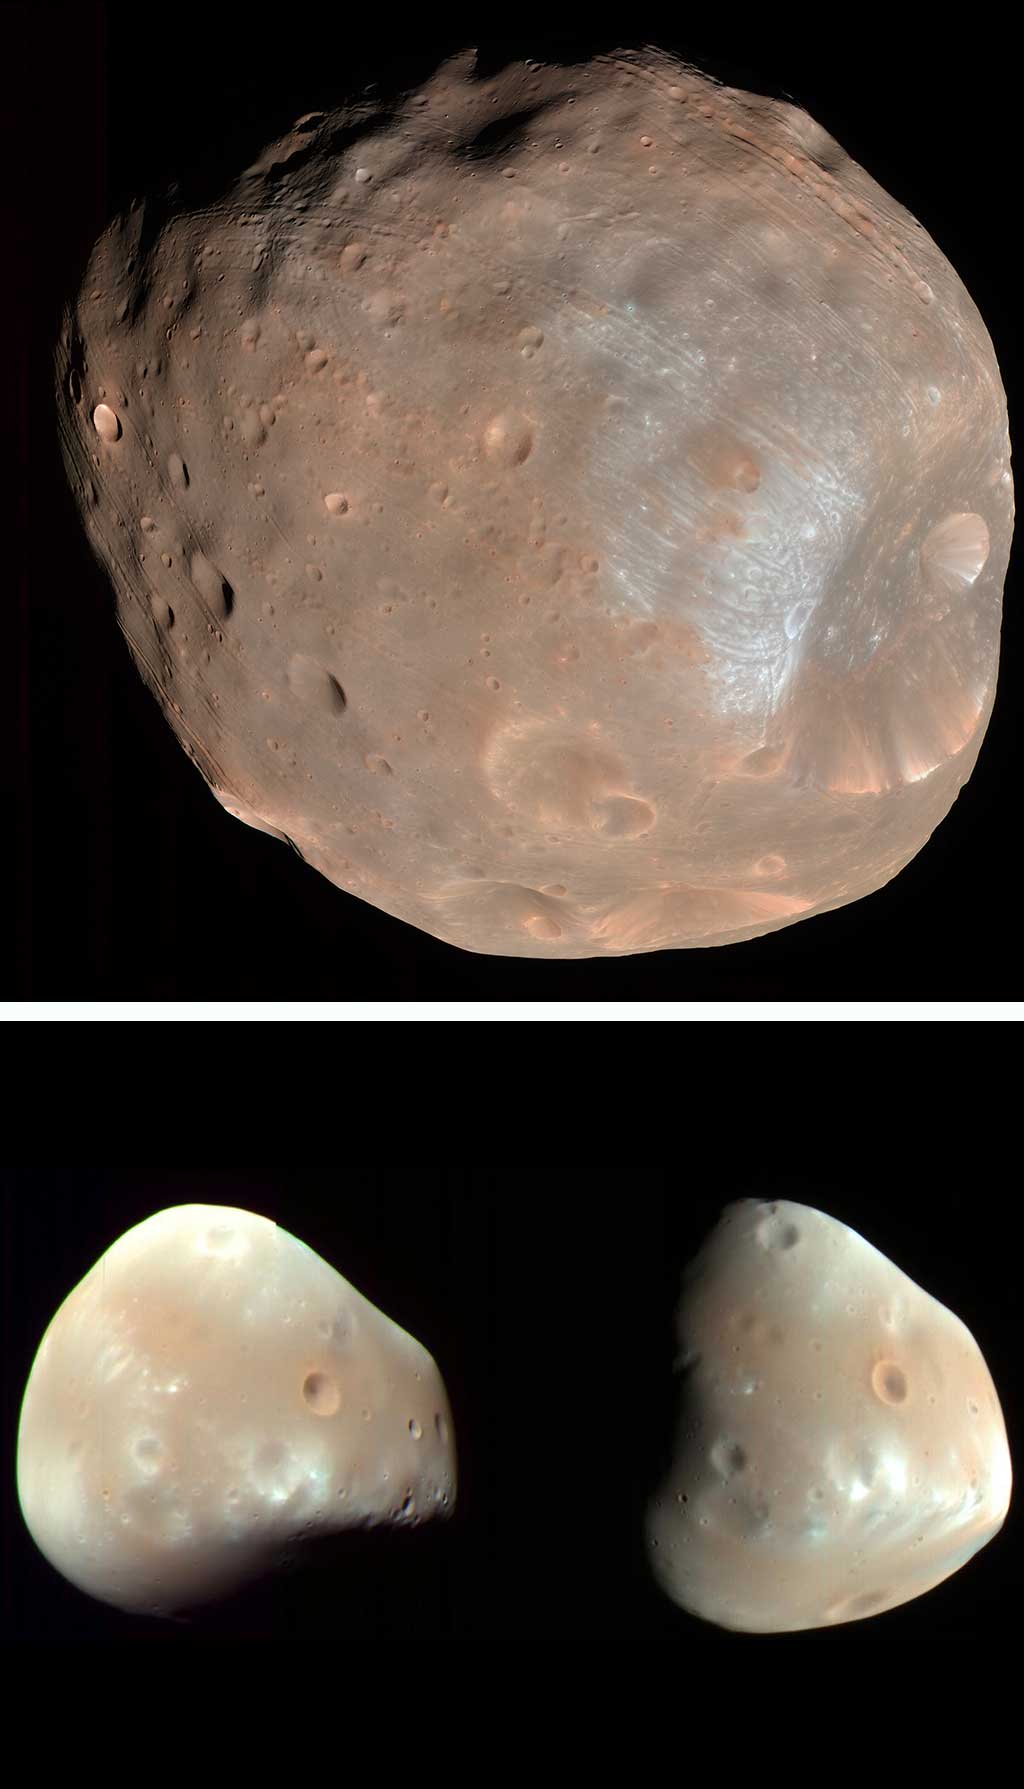 Image of Deimos and Phobos from Mars.